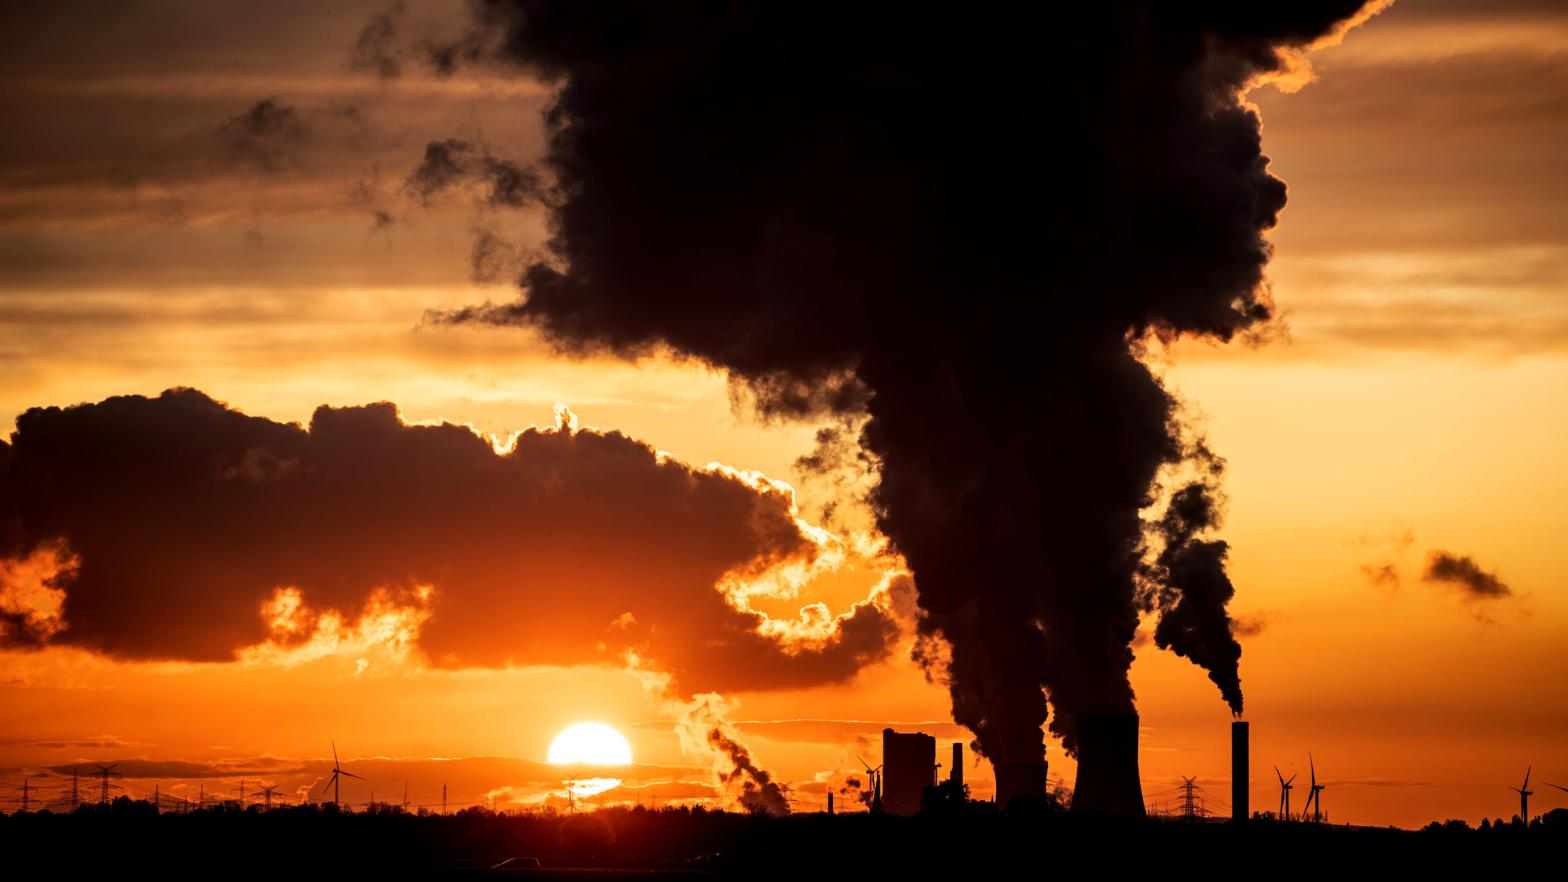 The sunset is pictured as steam rises from the chimneys of Niederaussen lignite-fired power plant in Roggendorf, western Germany on November 8, 2019. (Photo: Federico Gambarini / dpa / AFP, Getty Images)